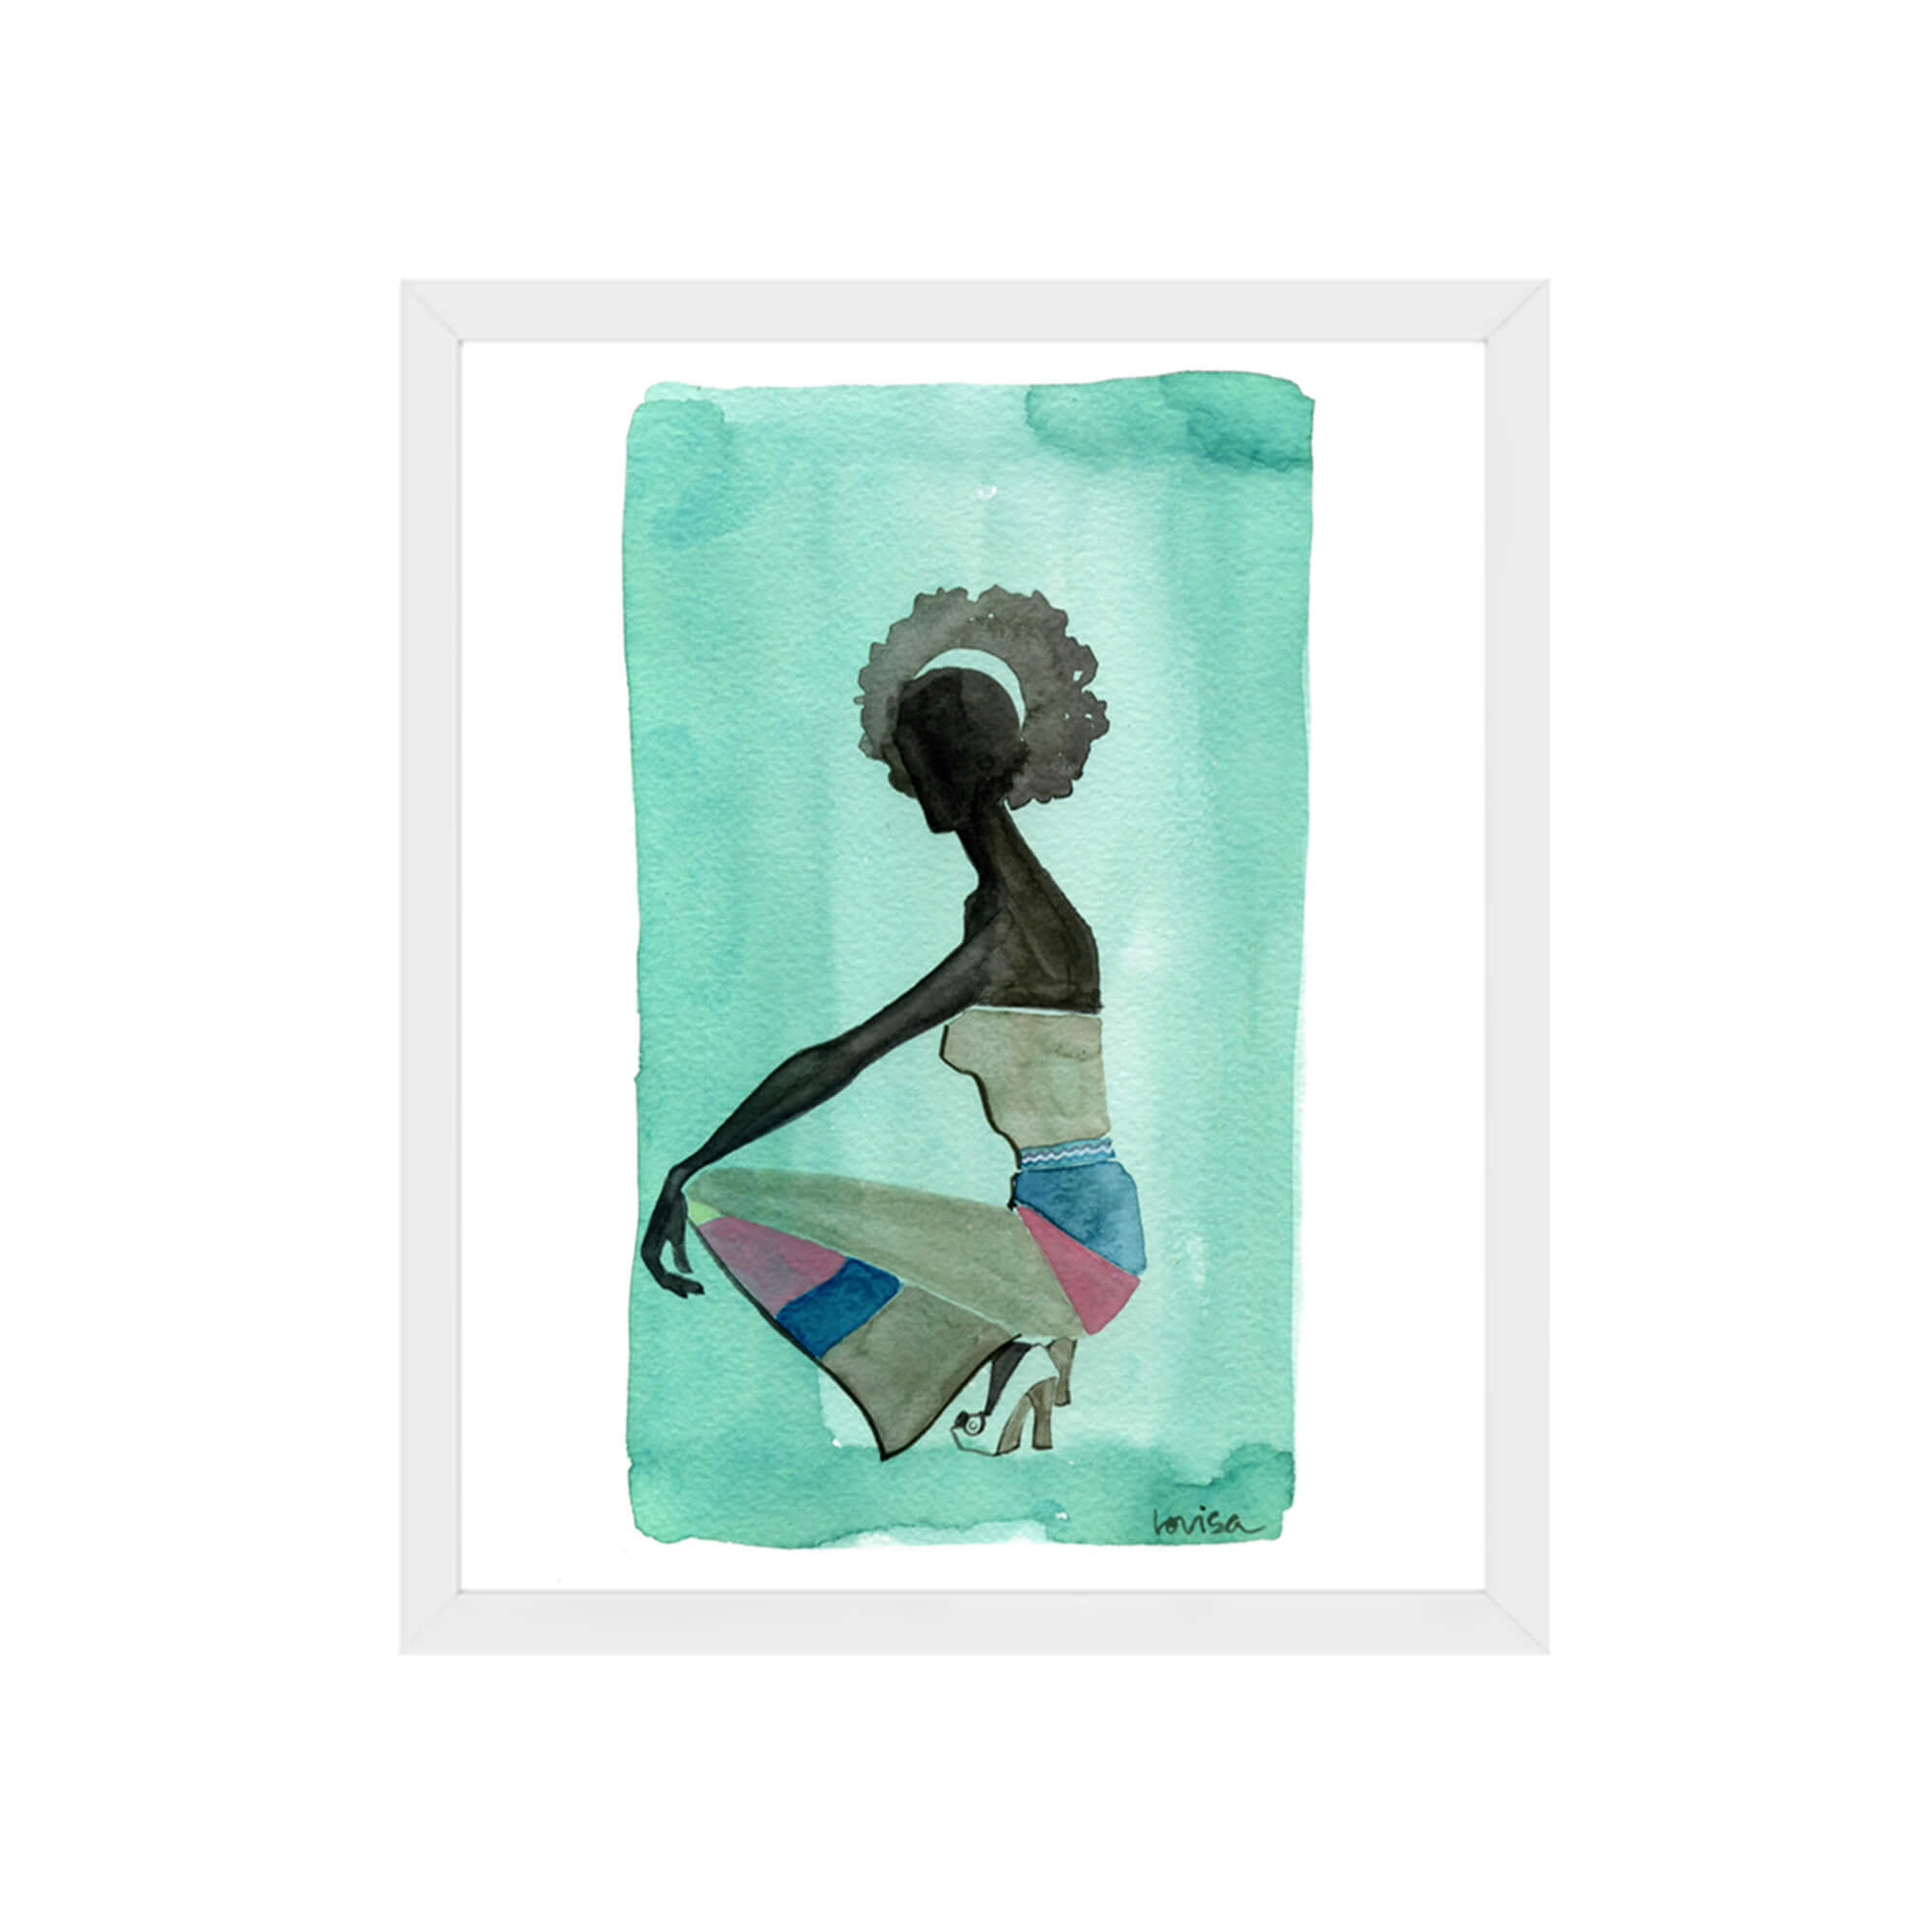 Framed paper giclée print of a watercolor artwork featuring a woman wearing a retro jumpsuit by Hawaii artist Lovisa Oliv